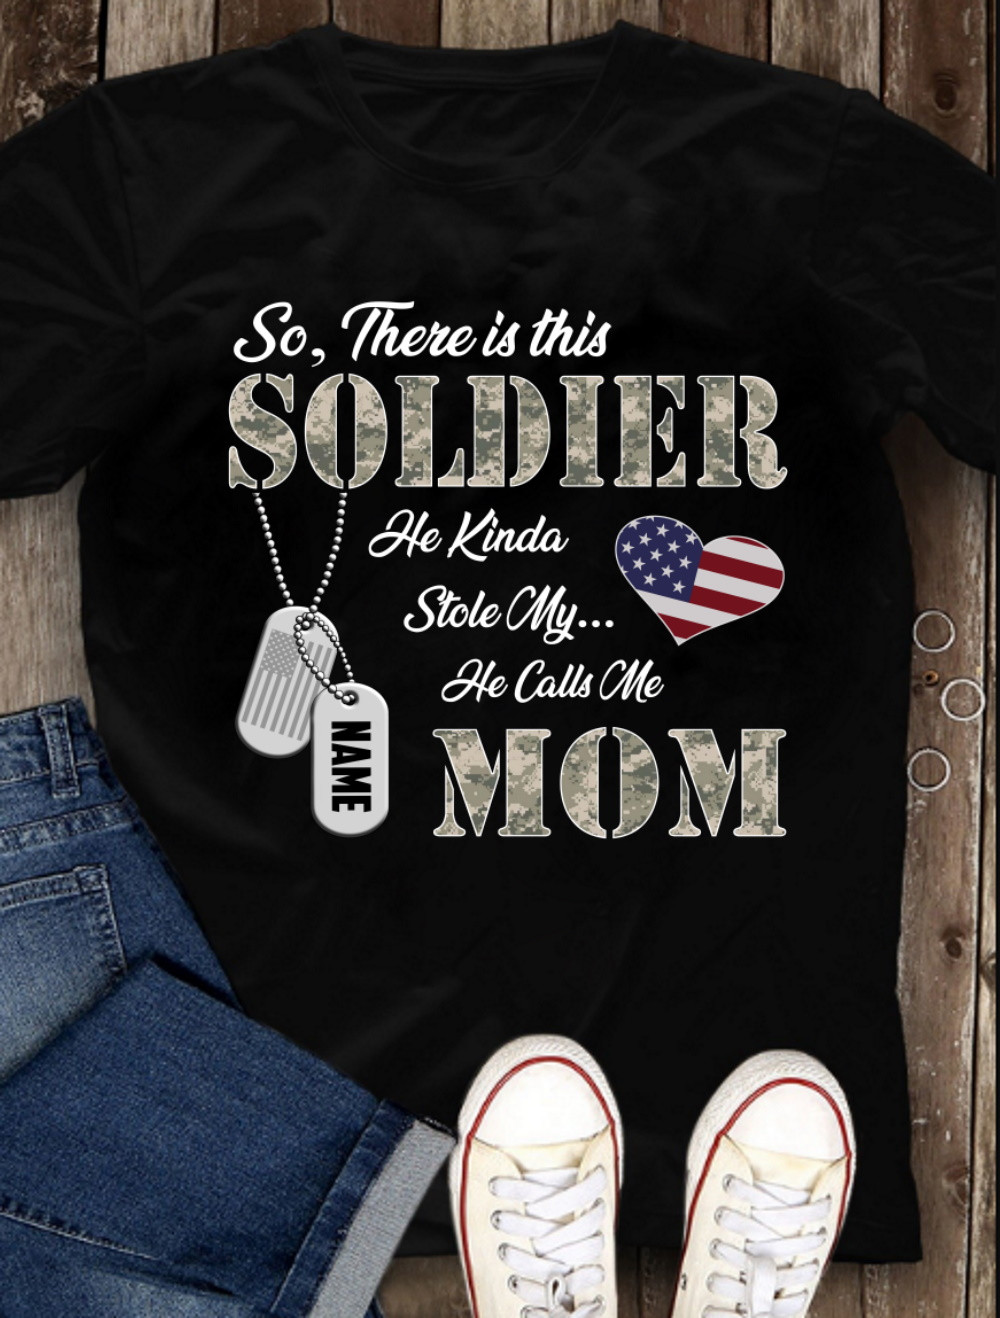 Female Veteran Custom Shirt, So There Is This Soldier He Kinda Stole My Heart T-Shirt